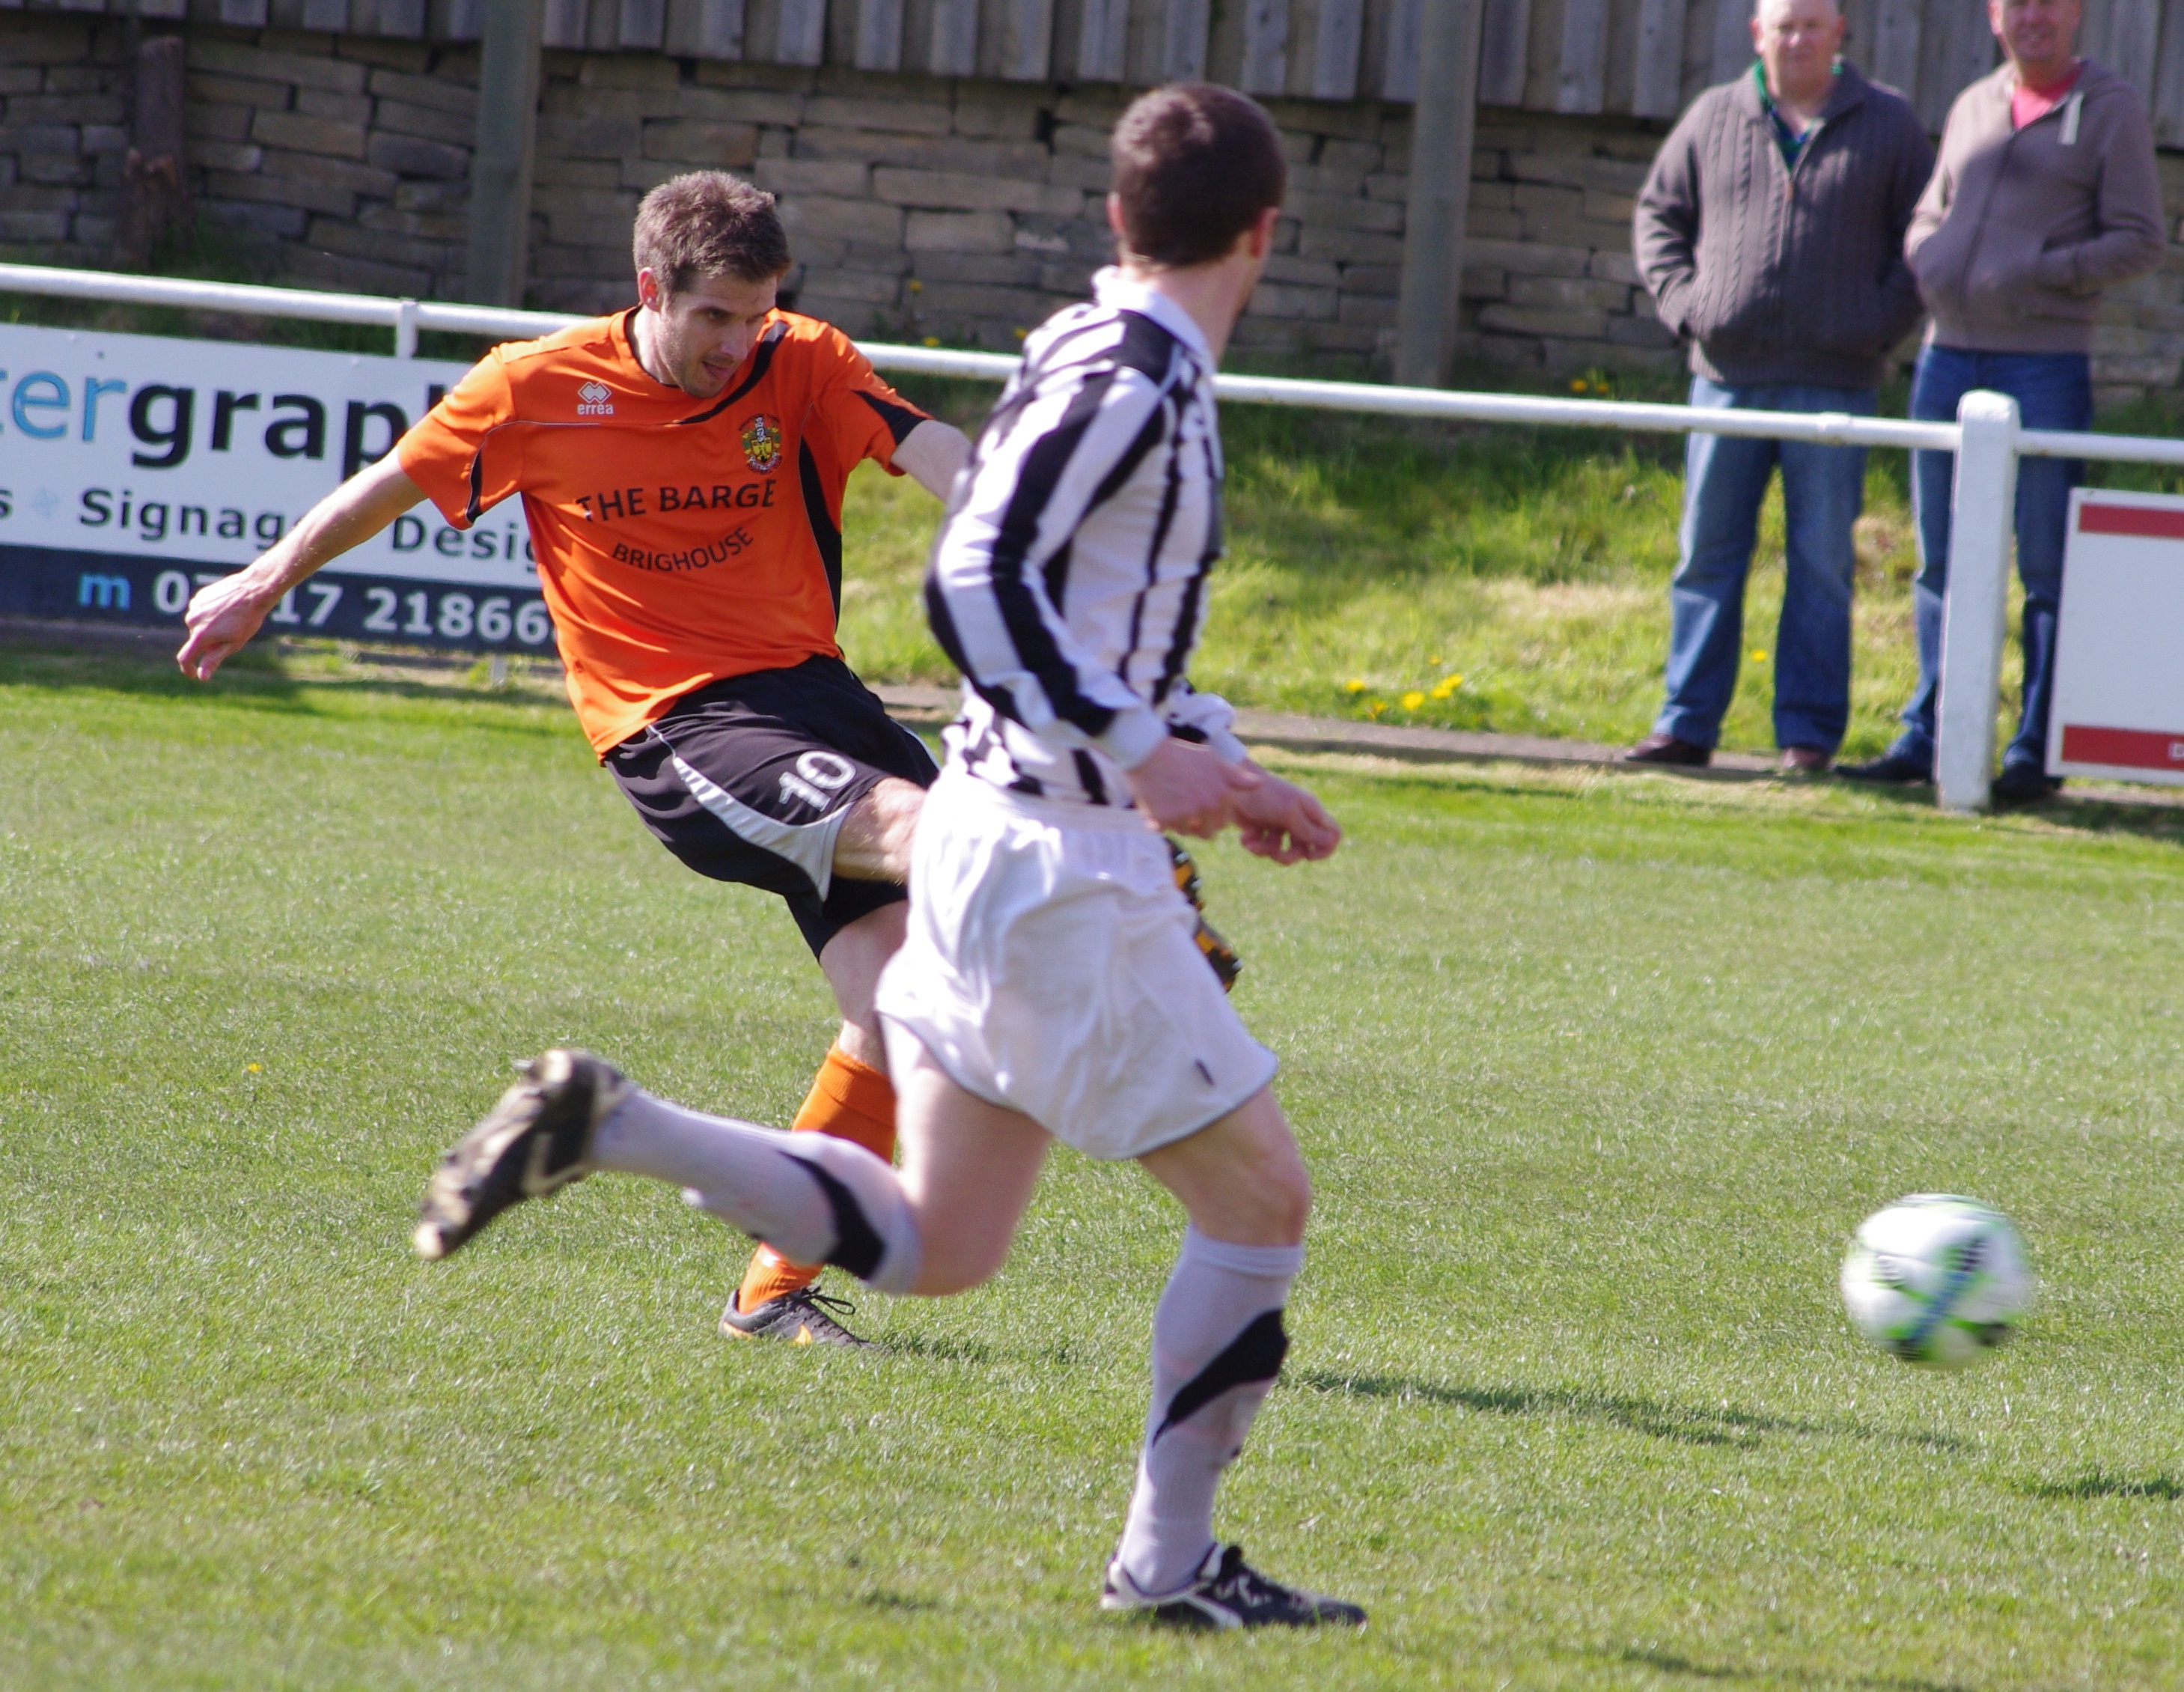 Tom Matthews put Brighouse ahead against Retford and sets them on their way to the Evo Stik Division One North